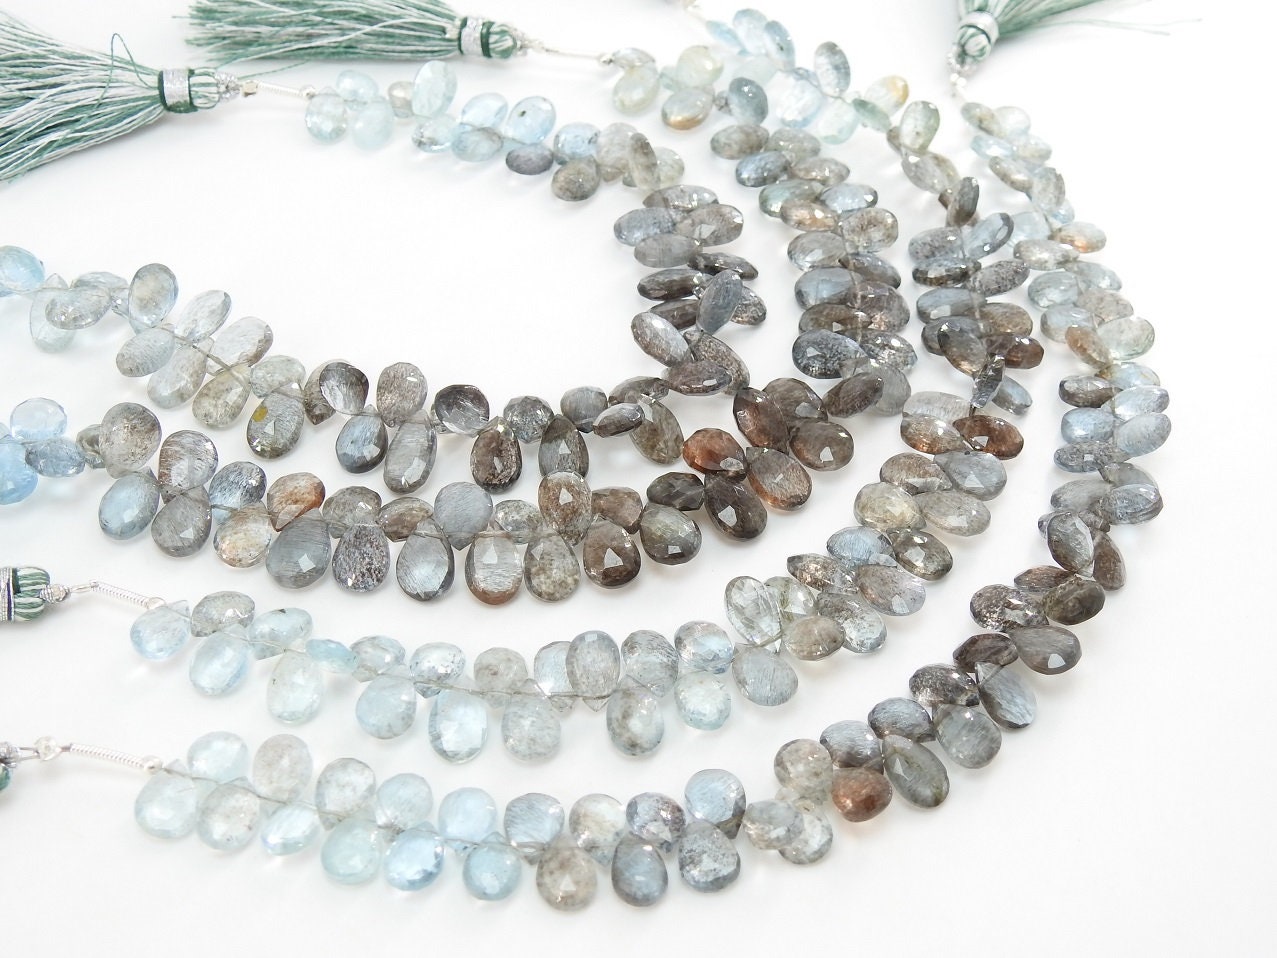 Moss Aquamarine Faceted Teardrop,Multi Shaded,Loose Bead 8Inch 9X6To8X5MM Approx Wholesale Price,New Arrival,100%Natural BB(BR4) | Save 33% - Rajasthan Living 17